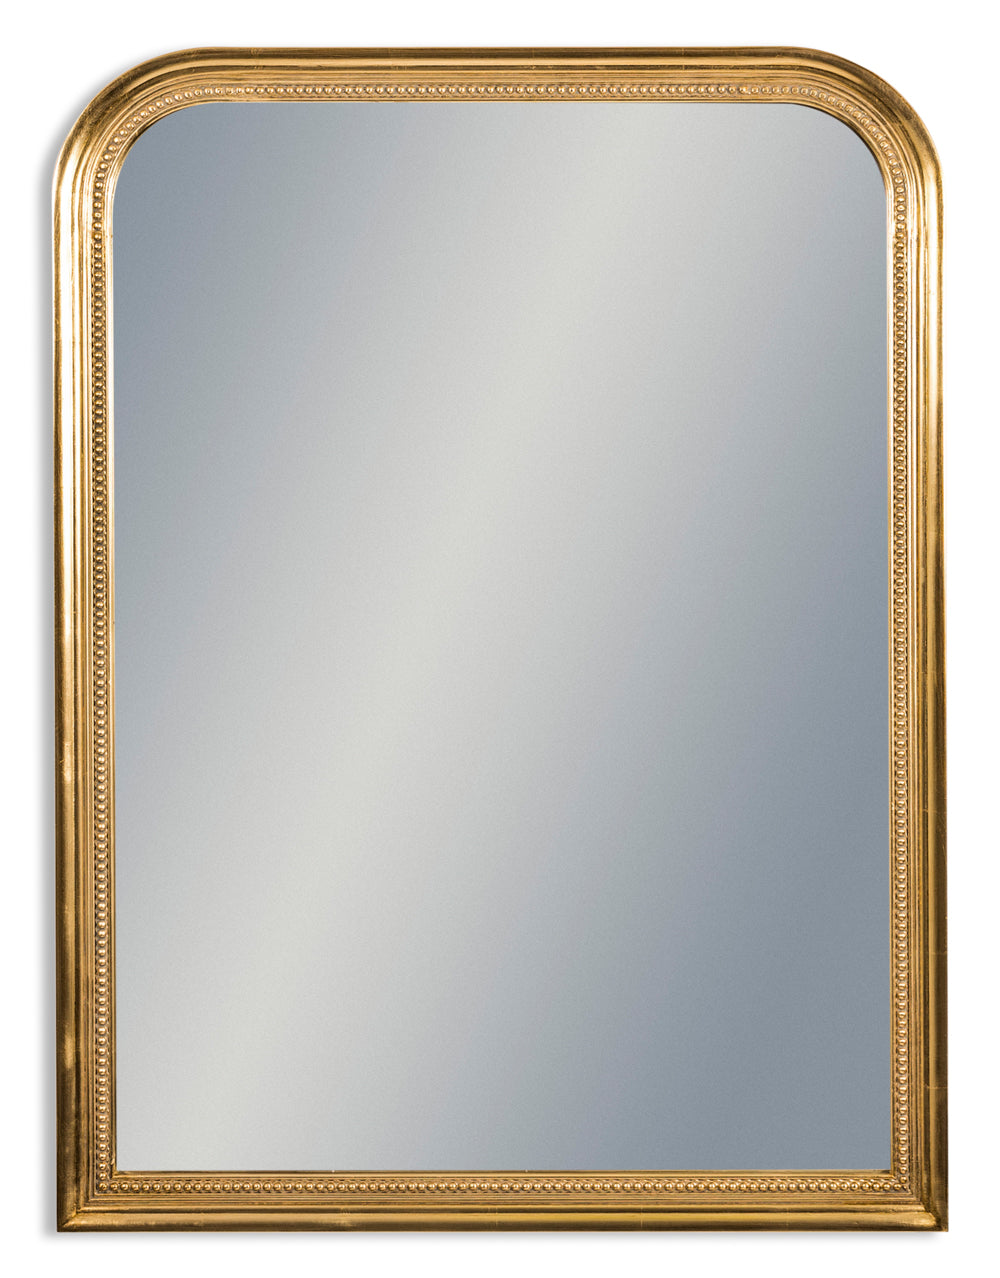 Antique Gold Beaded Portrait Wall Mirror